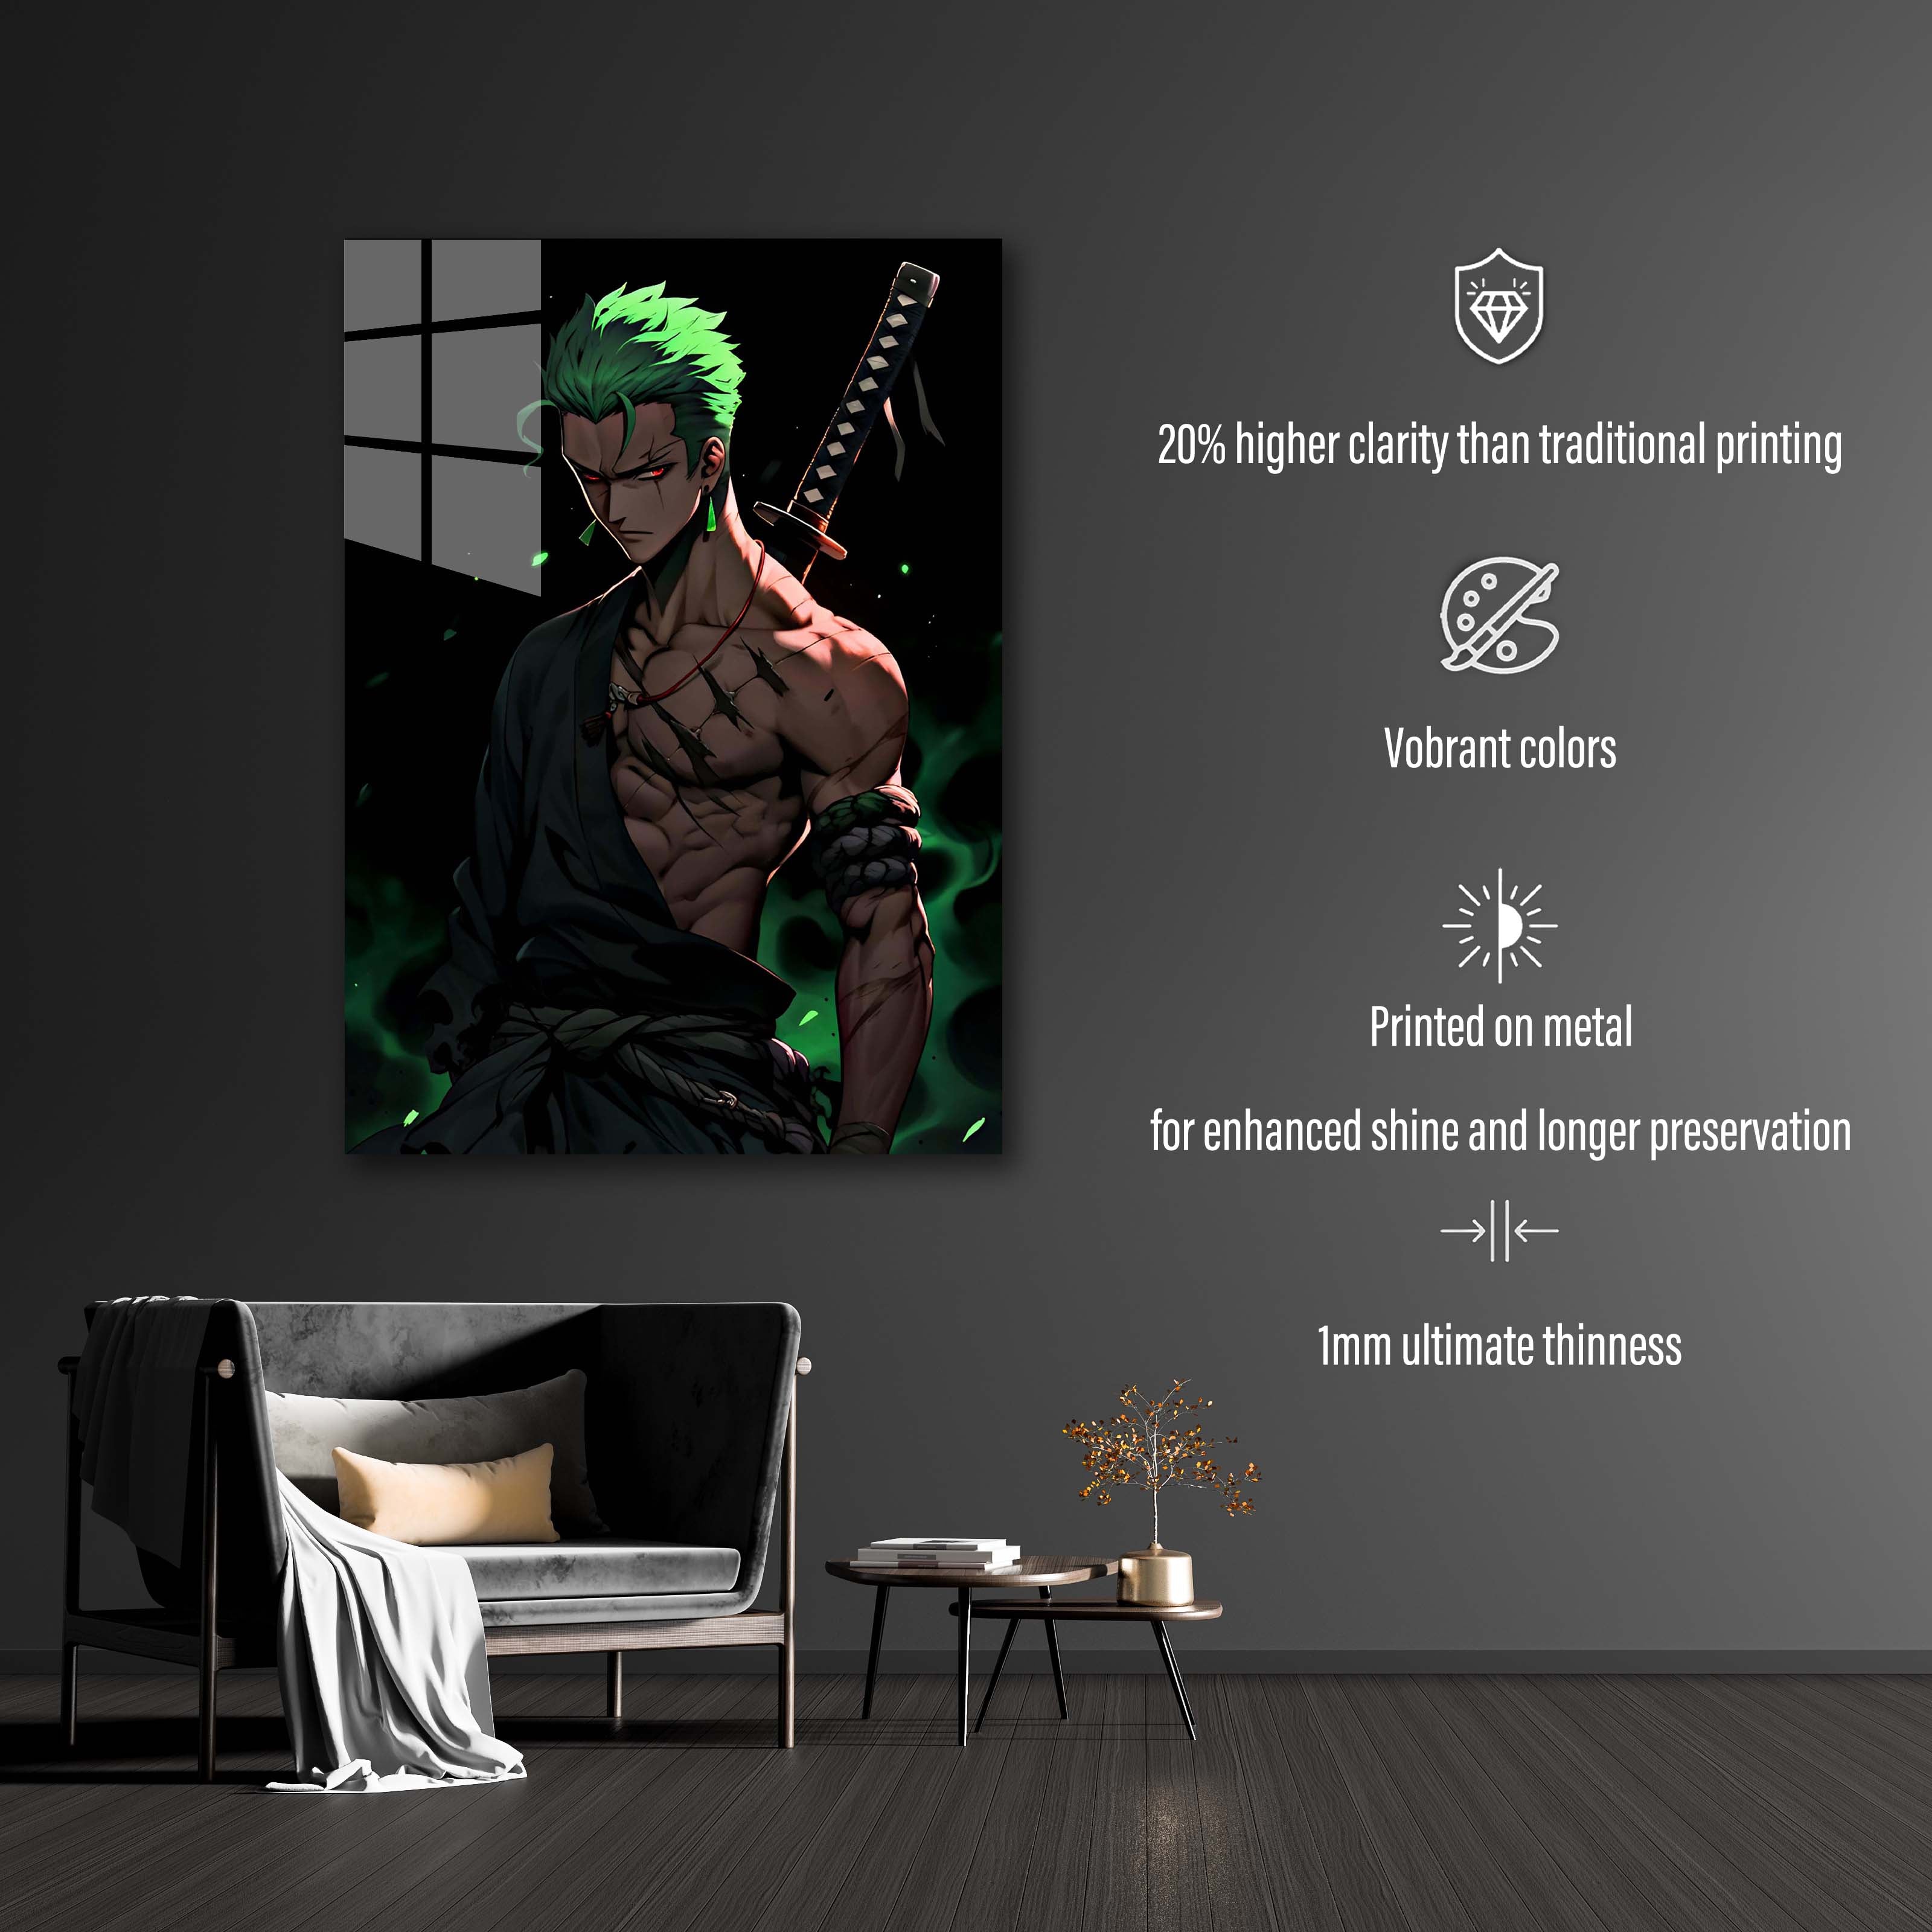 Roronoa Zoro from One piece anime-designed by @Vid_M@tion